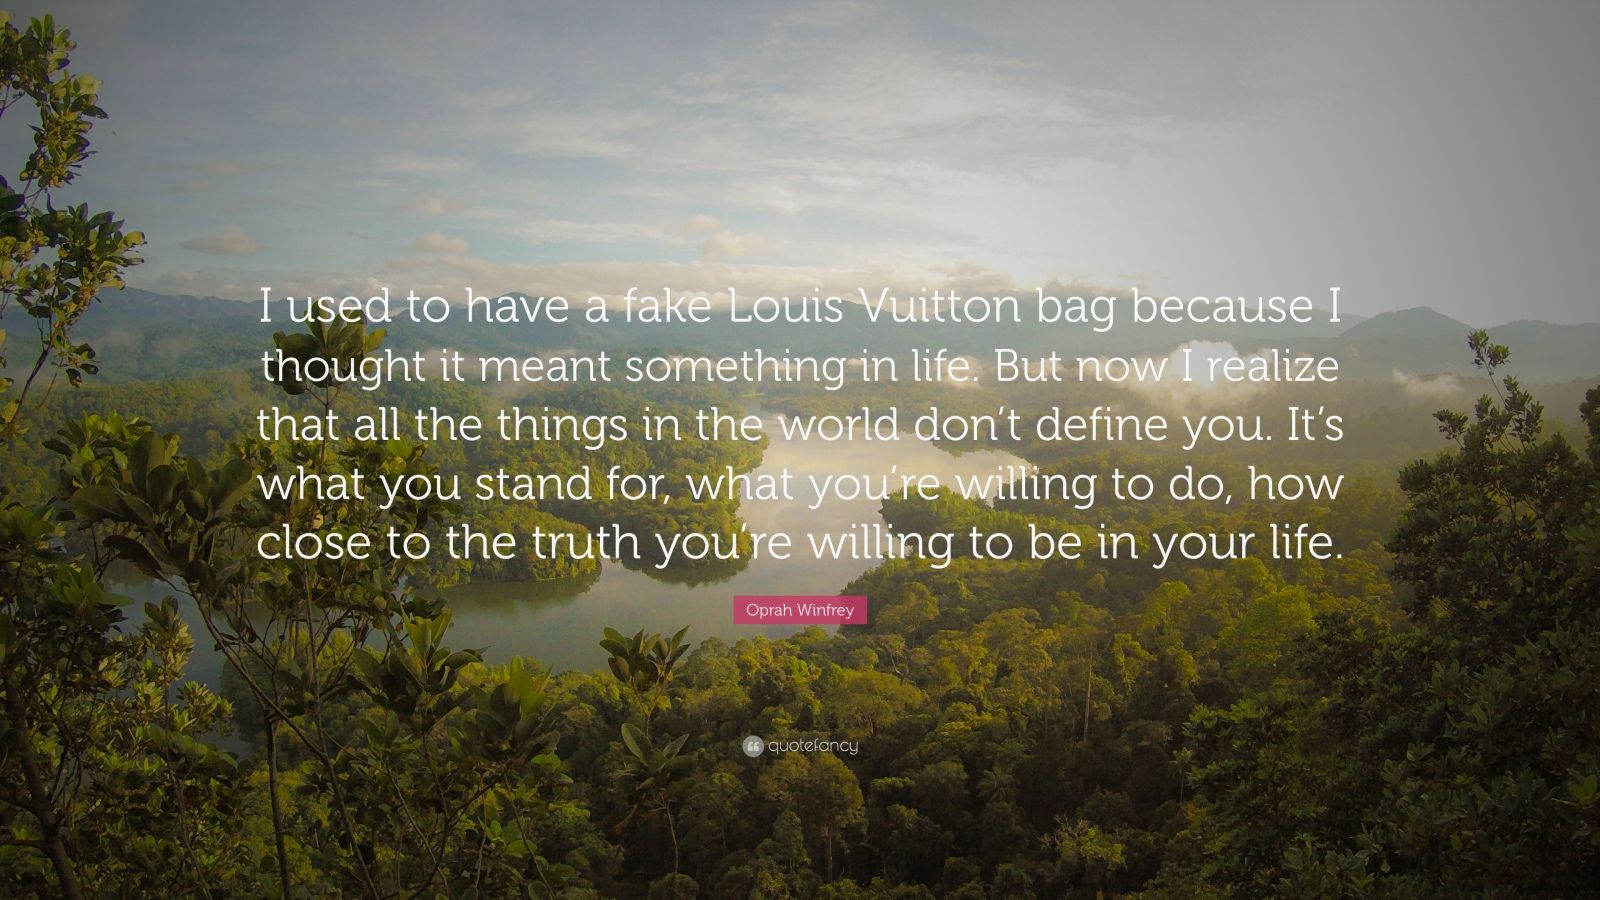 Oprah Winfrey Quote: “I used to have a fake Louis Vuitton bag because I thought it meant ...